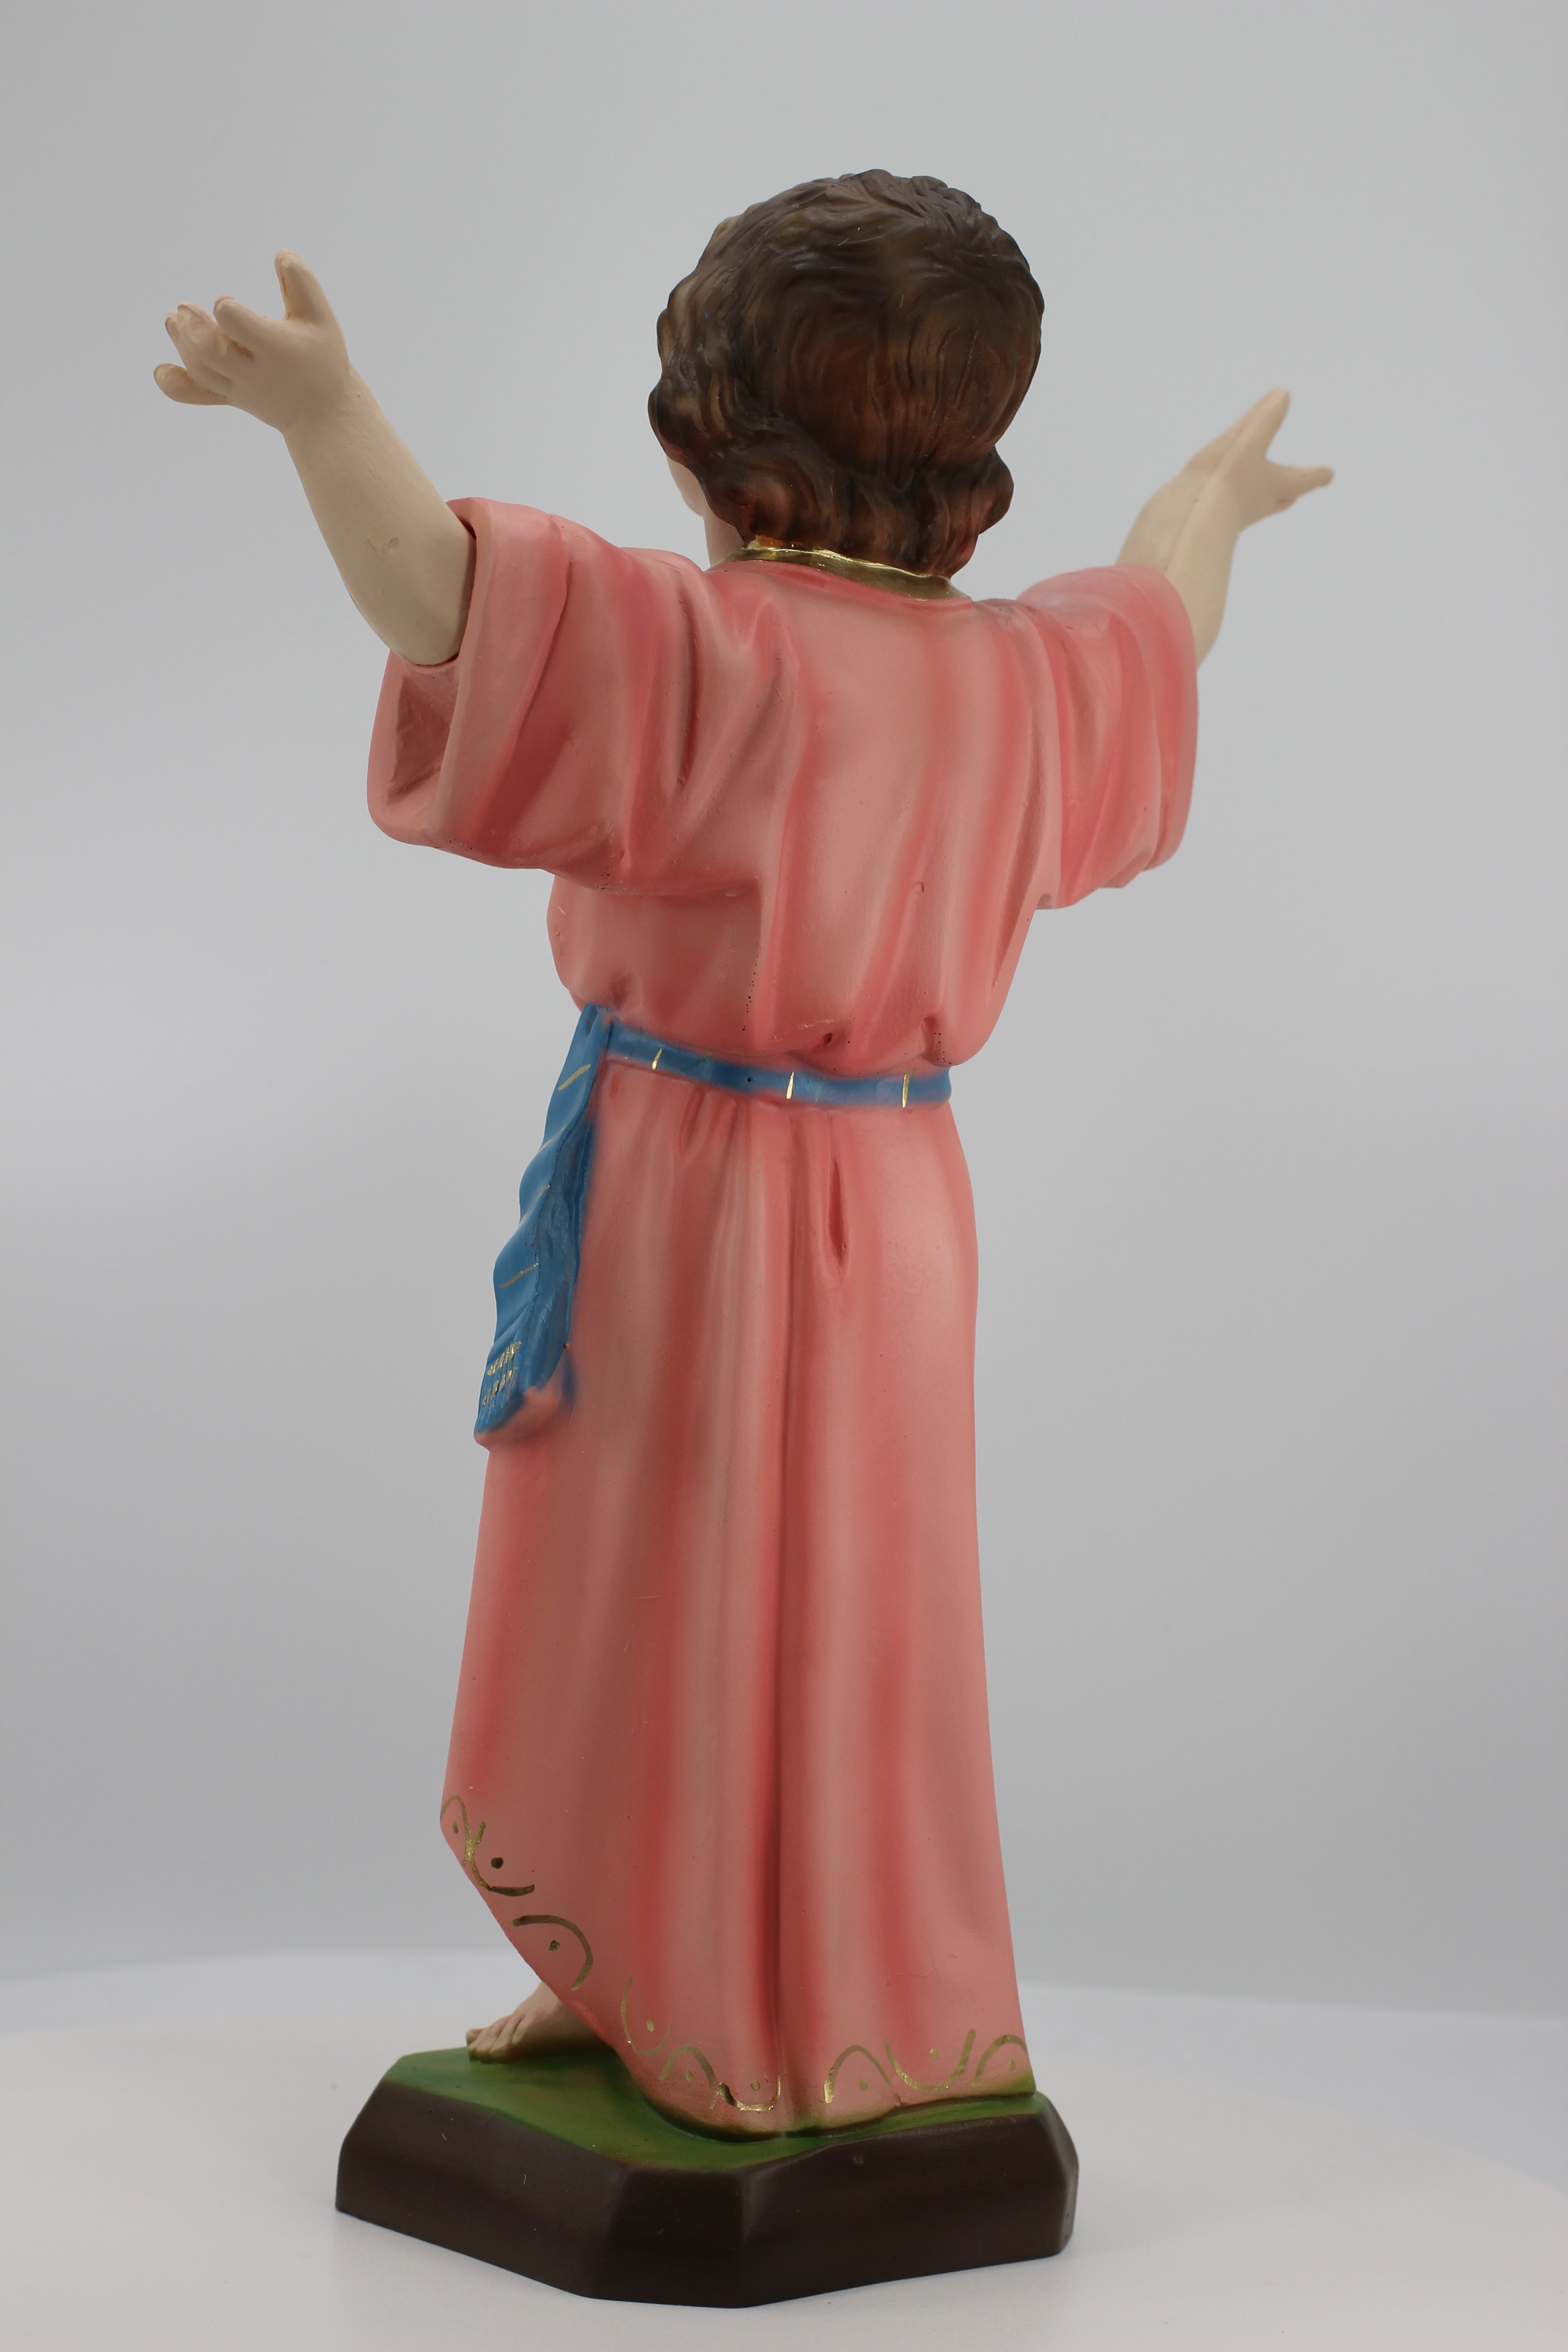 The Faith Gift Shop  Divine Child- Hand Painted in Italy - Our Tuscany Collection - Divino Niño Jesus